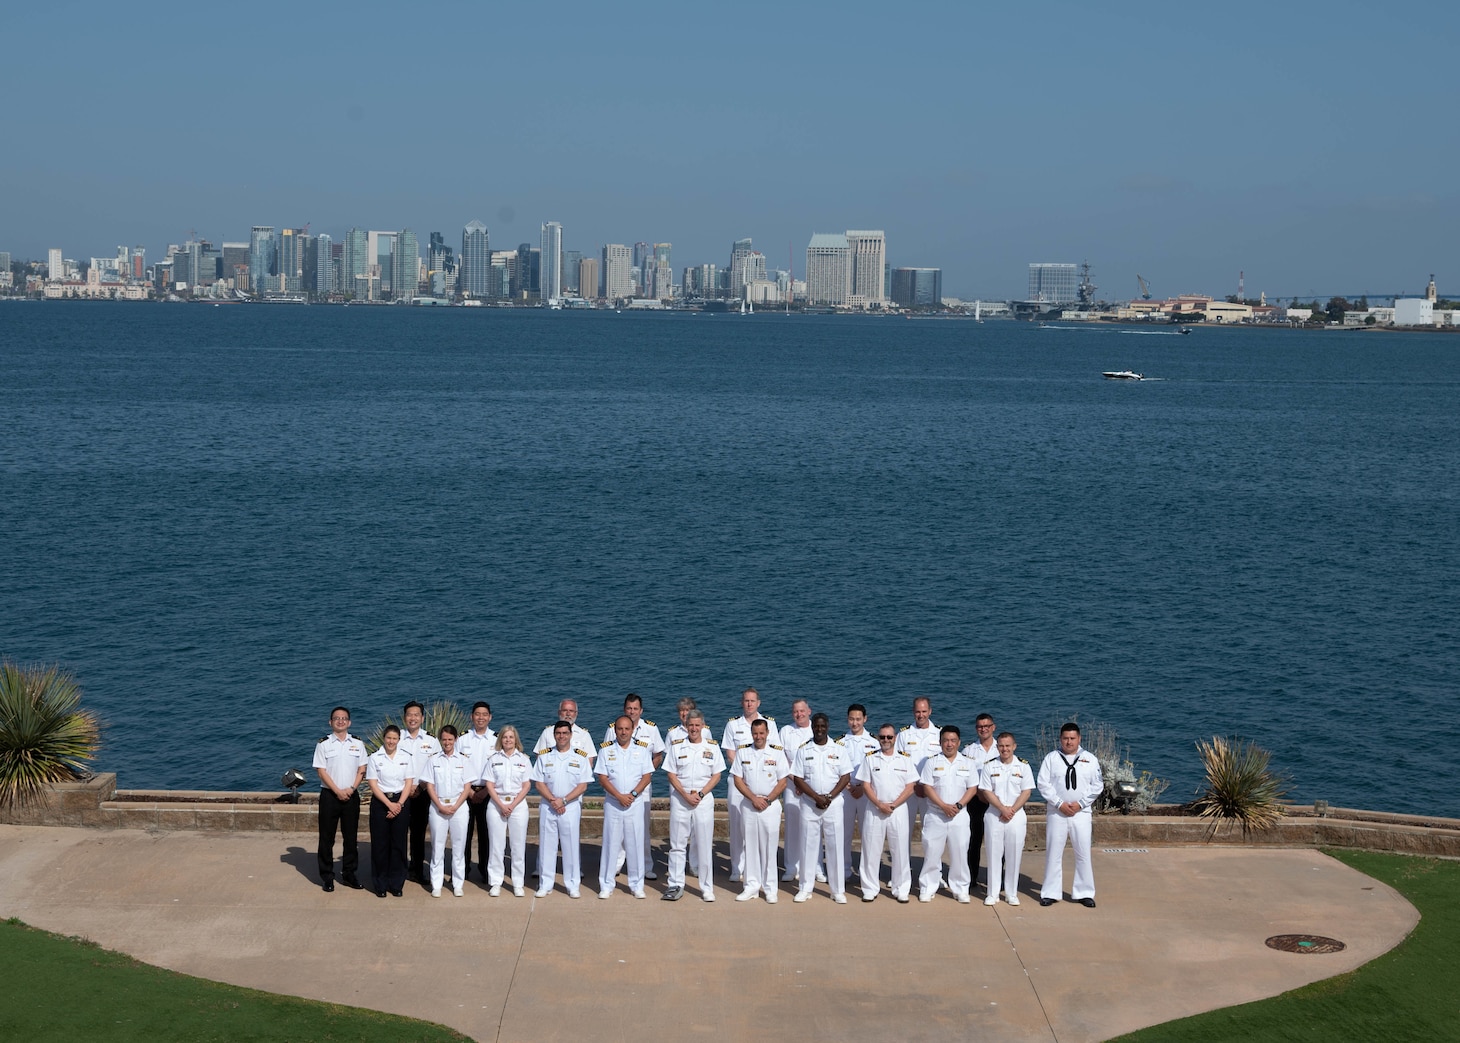 Service members of Pacific Indian Ocean Shipping Working Group (PACIOSWG) pose for a photo at Naval Base Point Loma